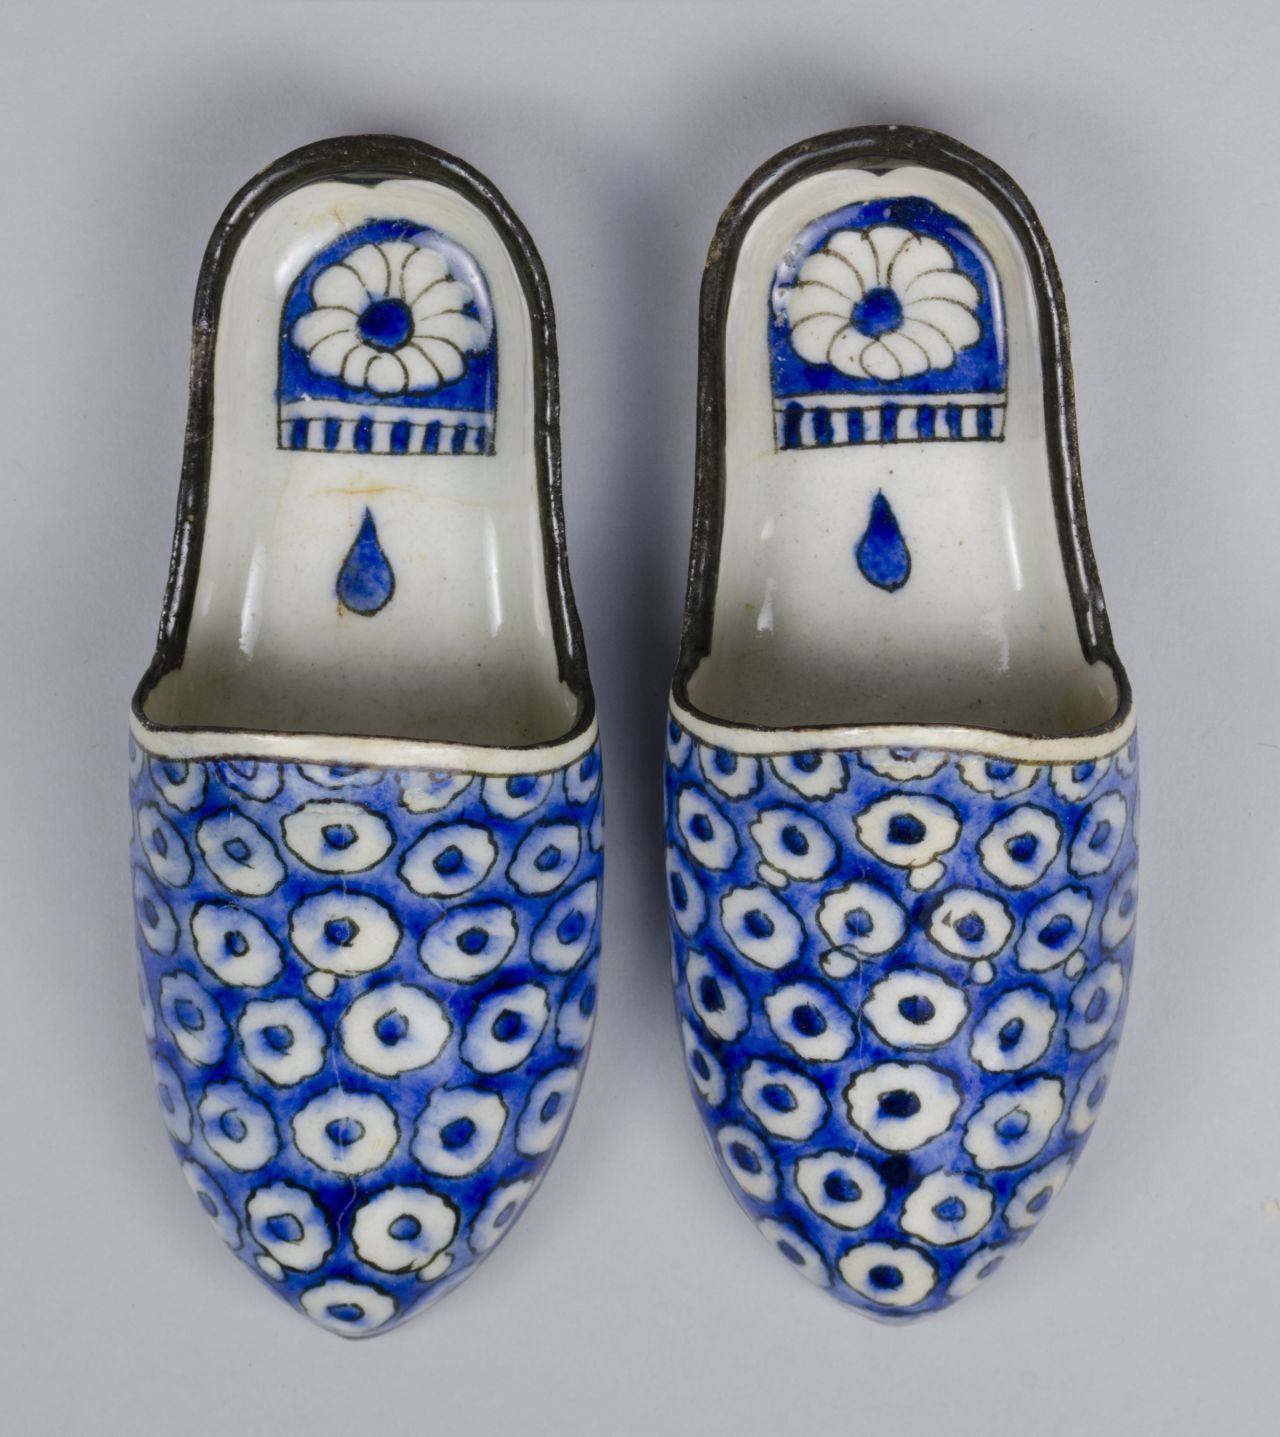 A pair of Chinese-made porcelain slippers from the 18th century. While serving as objets d'art, the shoes would have been used in semi-public bathhouses.